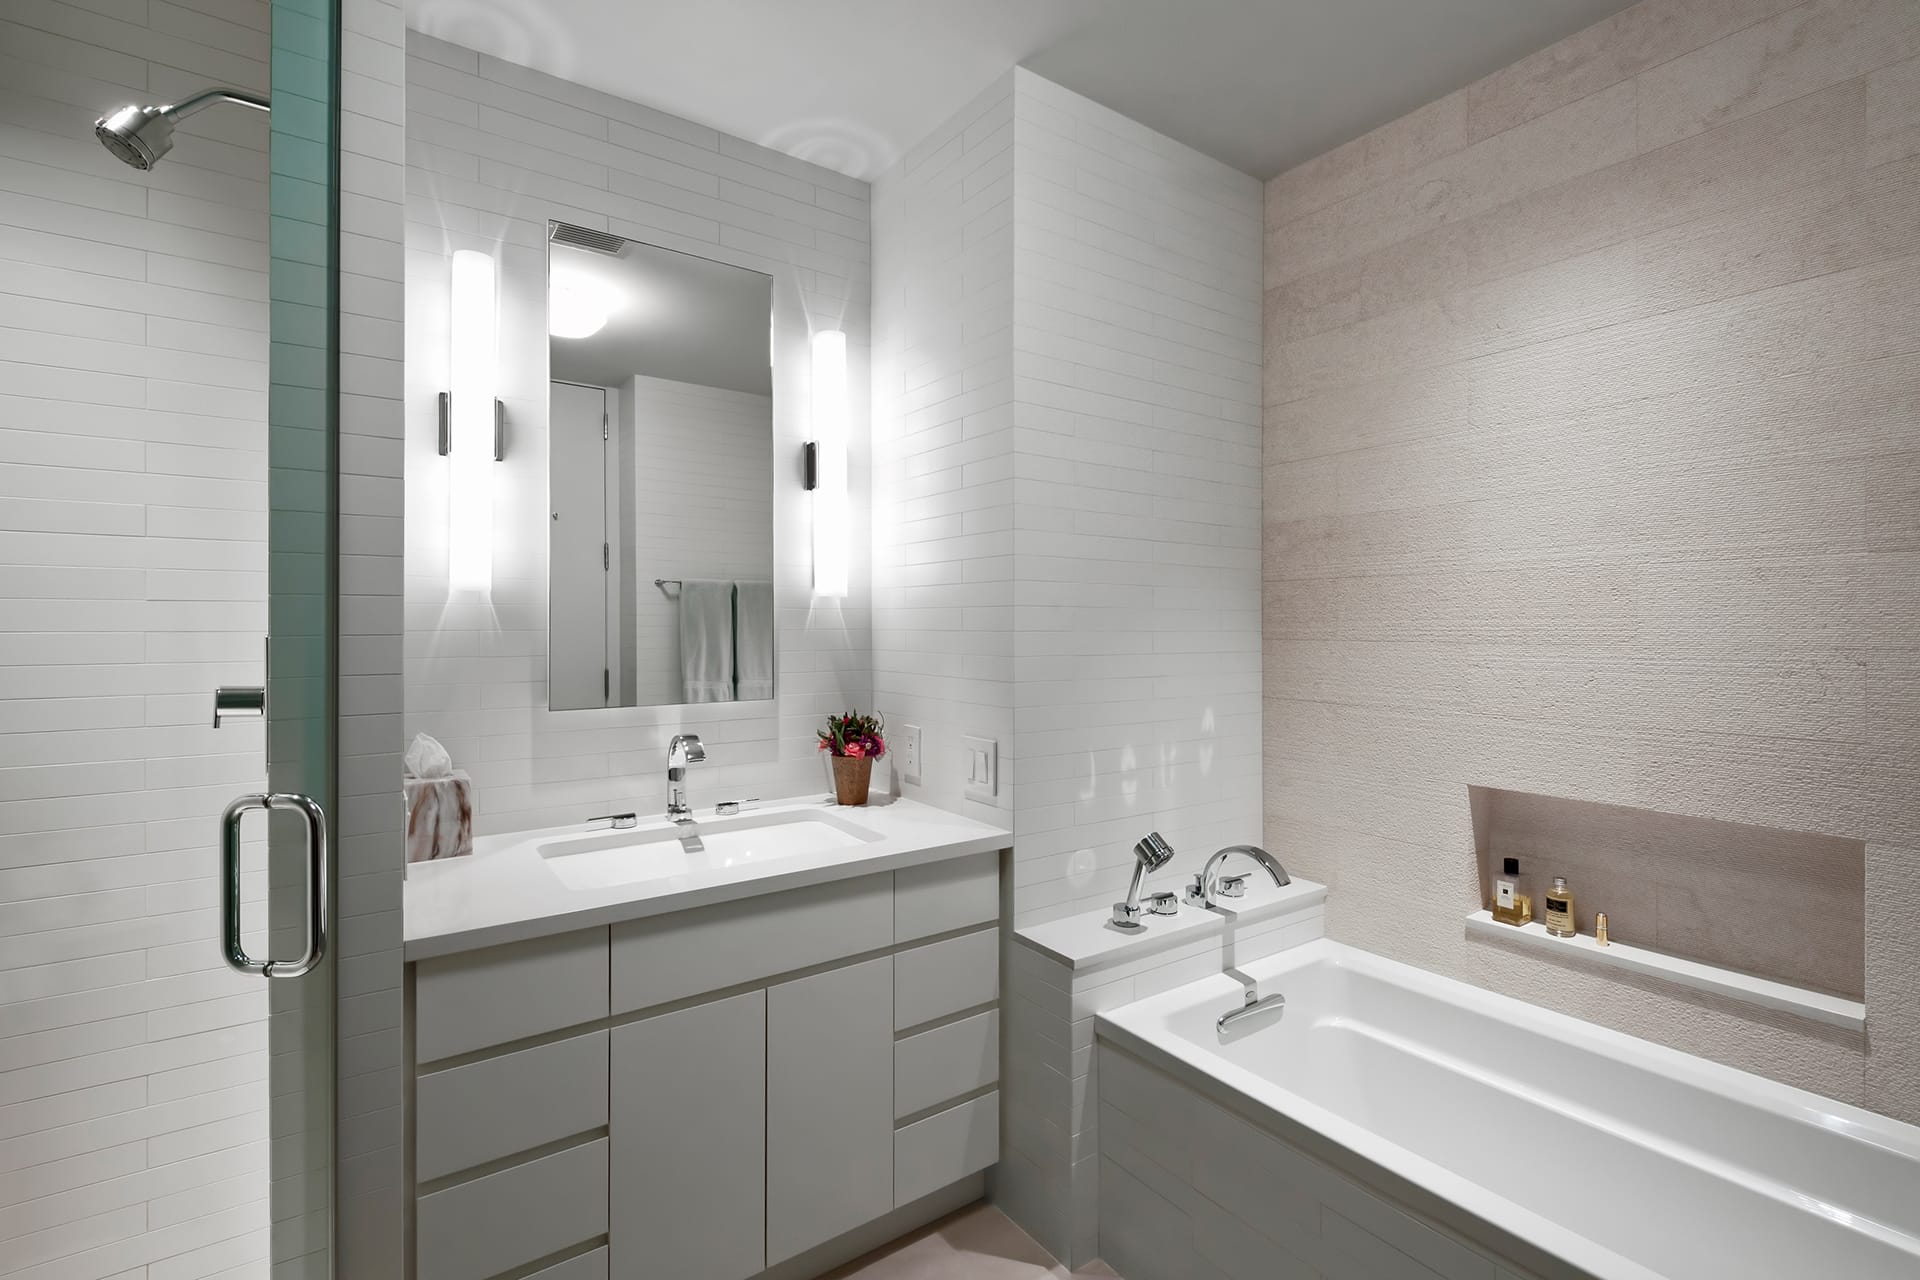 Primary bathroom with a built-in bathtub on the right, separate shower stall on the left, and all-white vanity in the center.